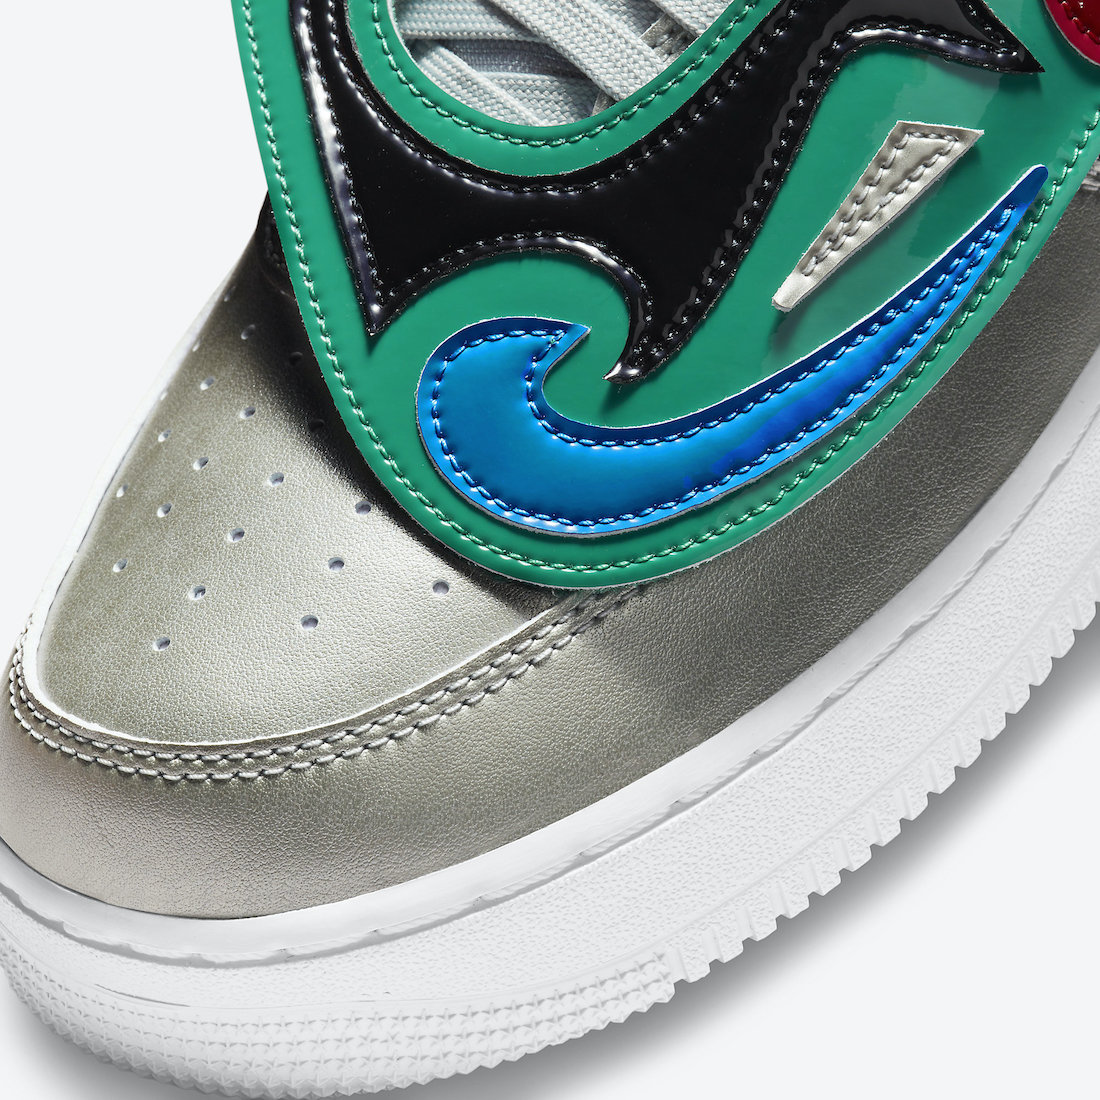 Nike Air Force 1 Low Lucha Libre DM6177-095 Release Date Info